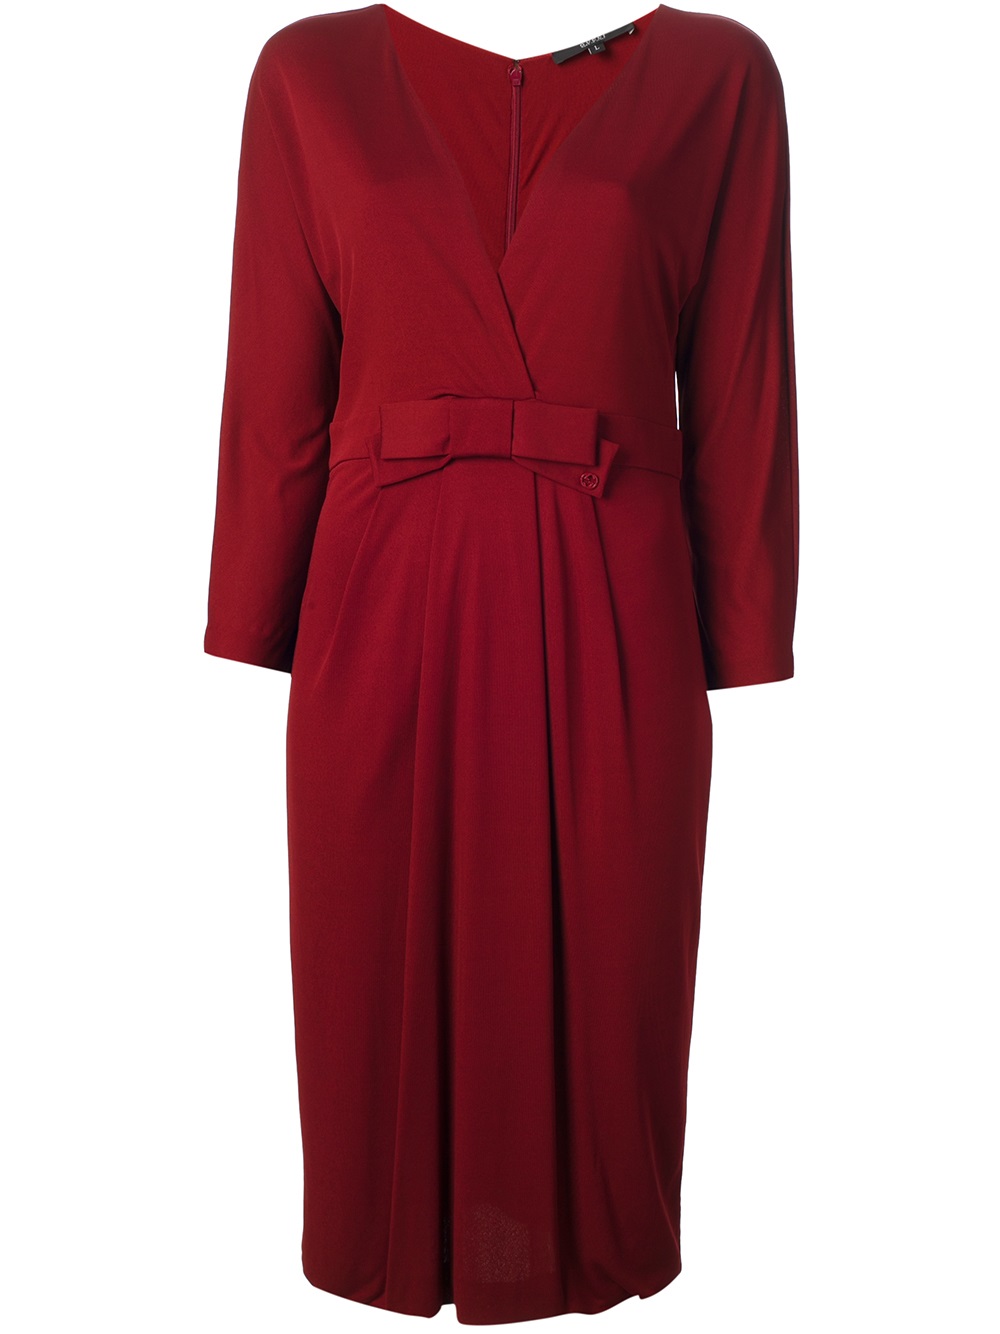 Gucci Gucci Bow Detail Dress in Red | Lyst